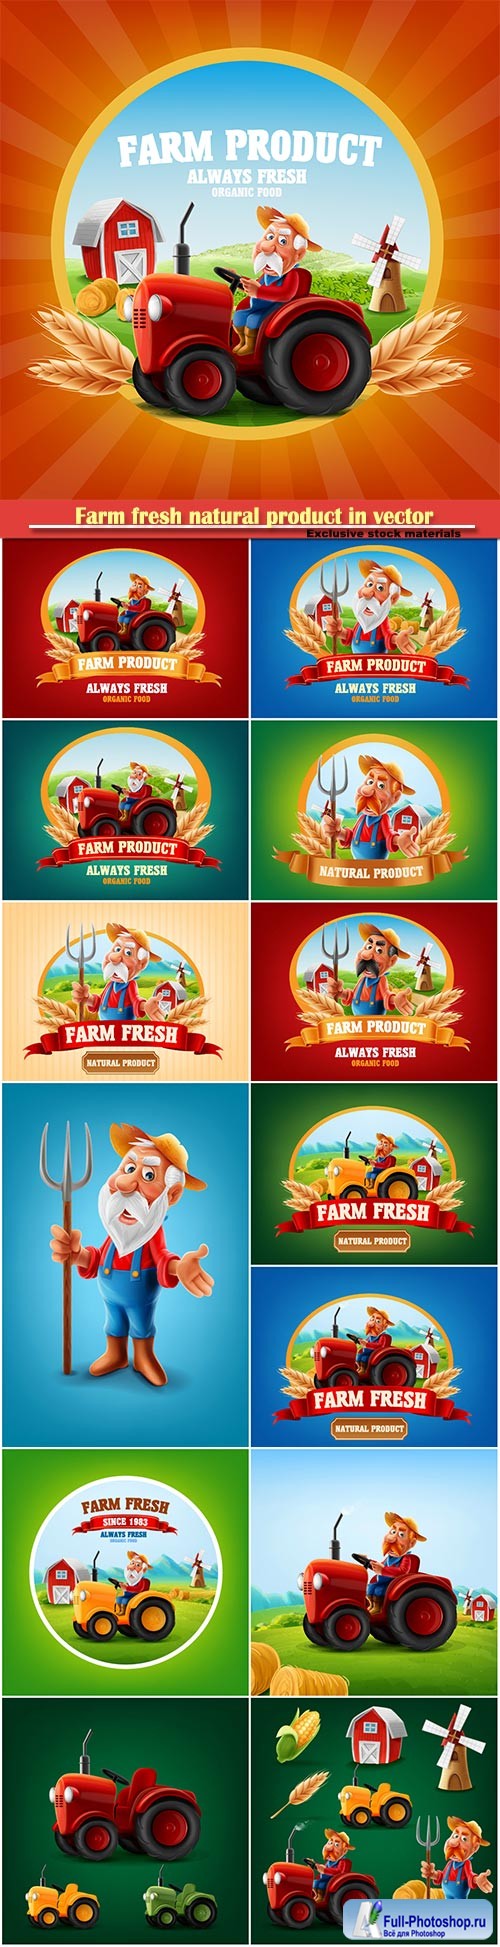 Farm fresh natural product in vector